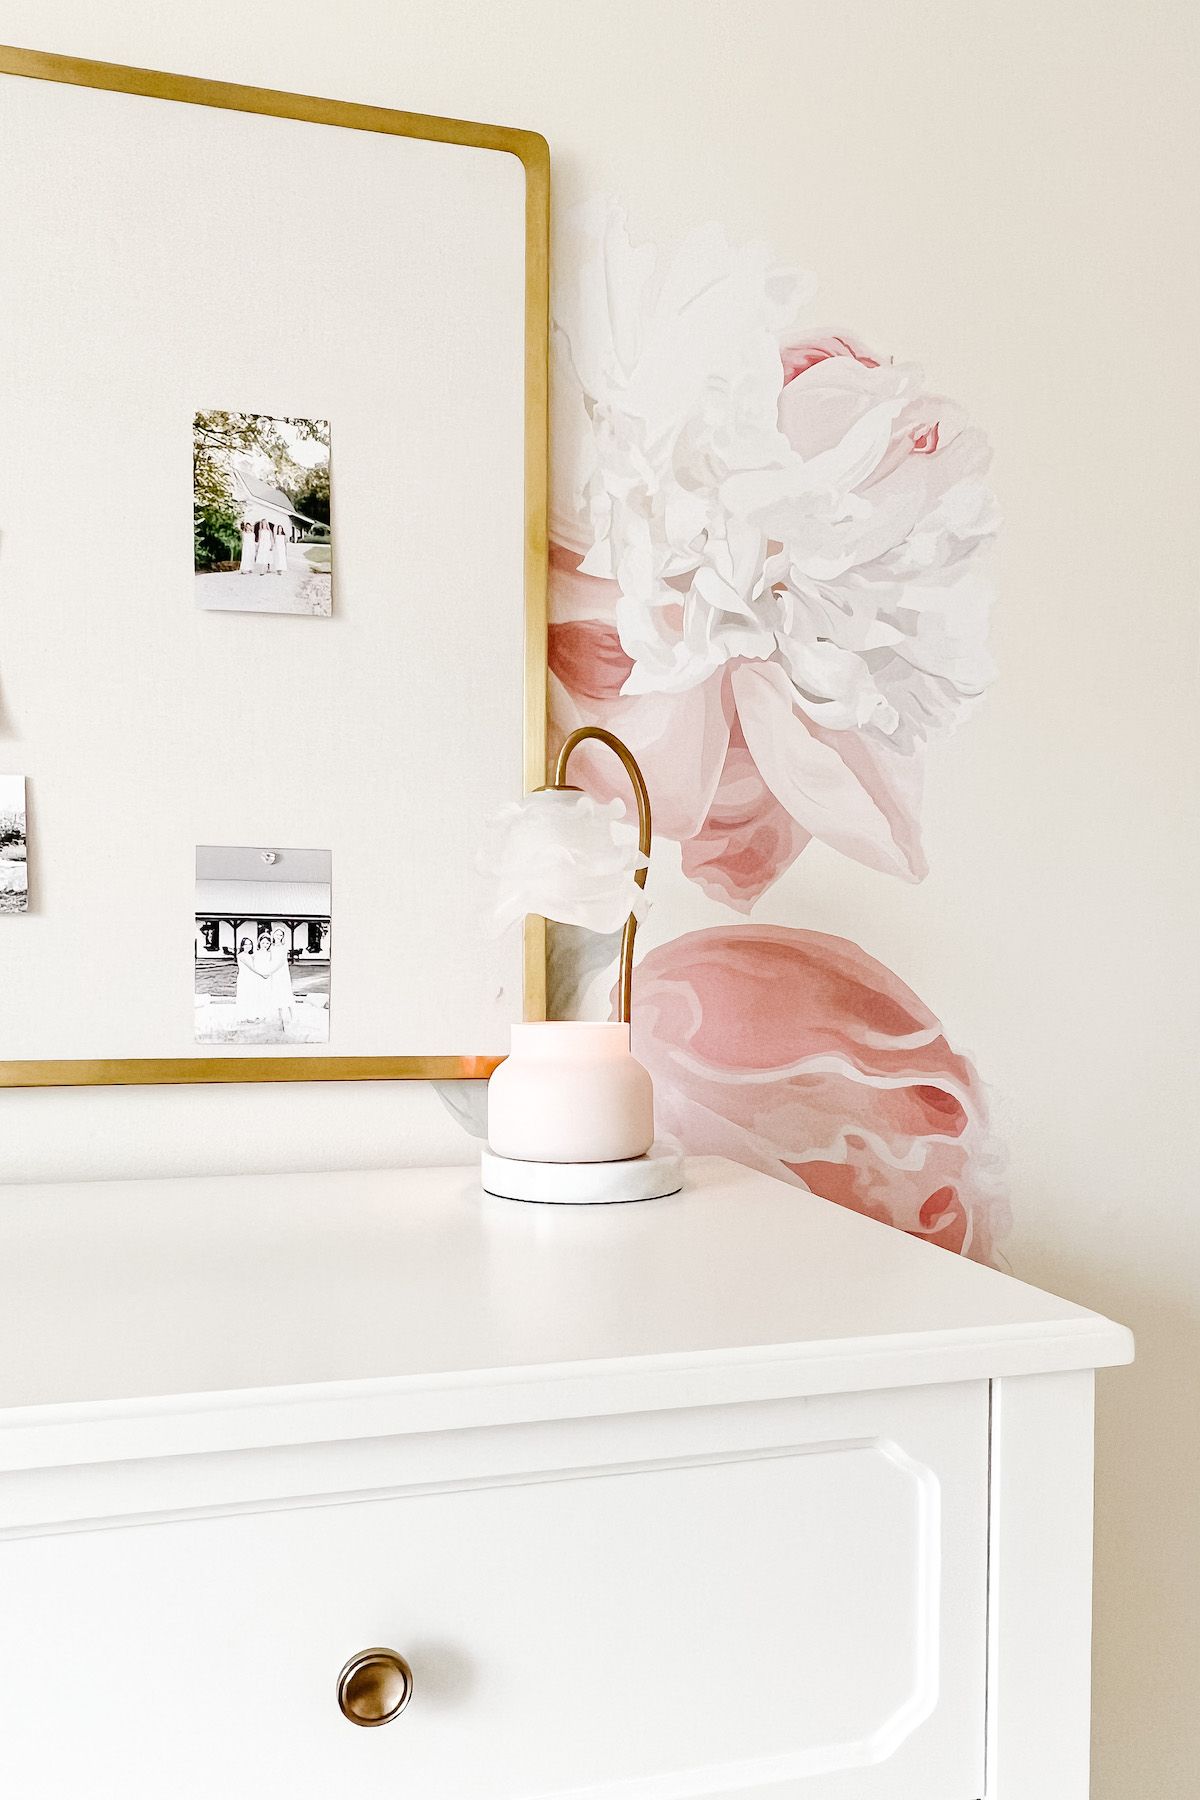 Girls' room with white furniture, pink floral wallpaper and an Amazon candle warmer on the dresser.